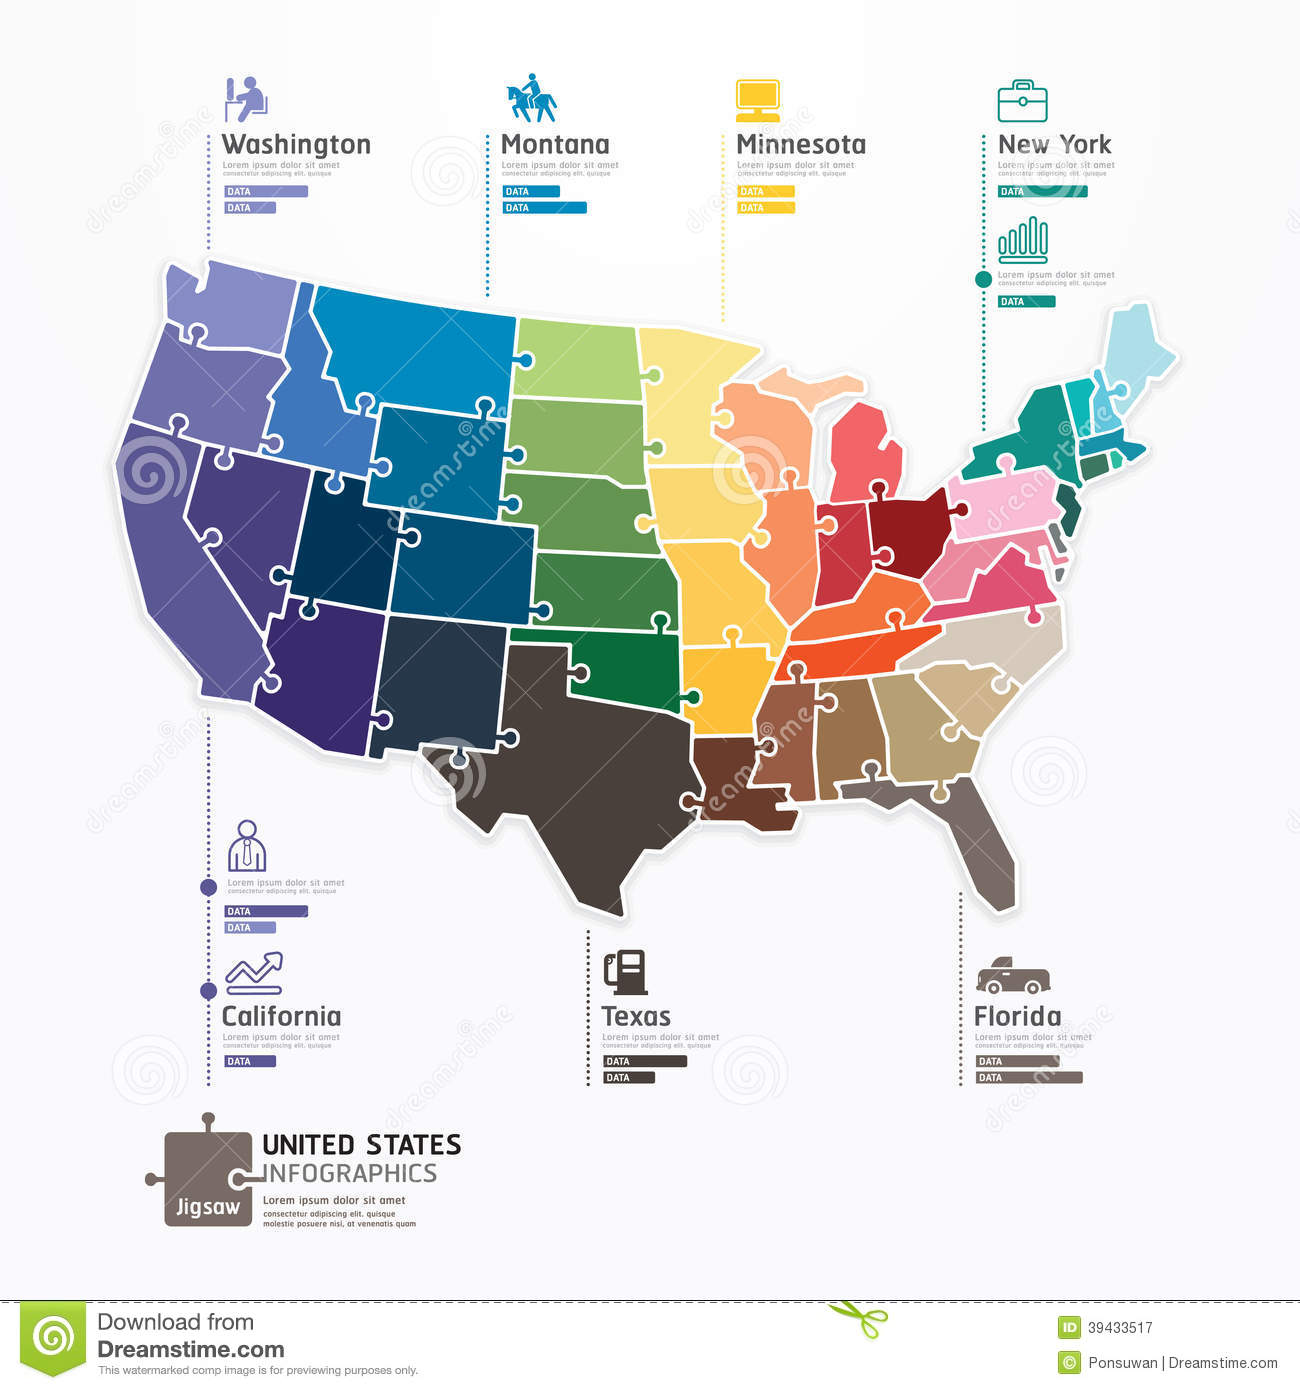 United States Map Infographic